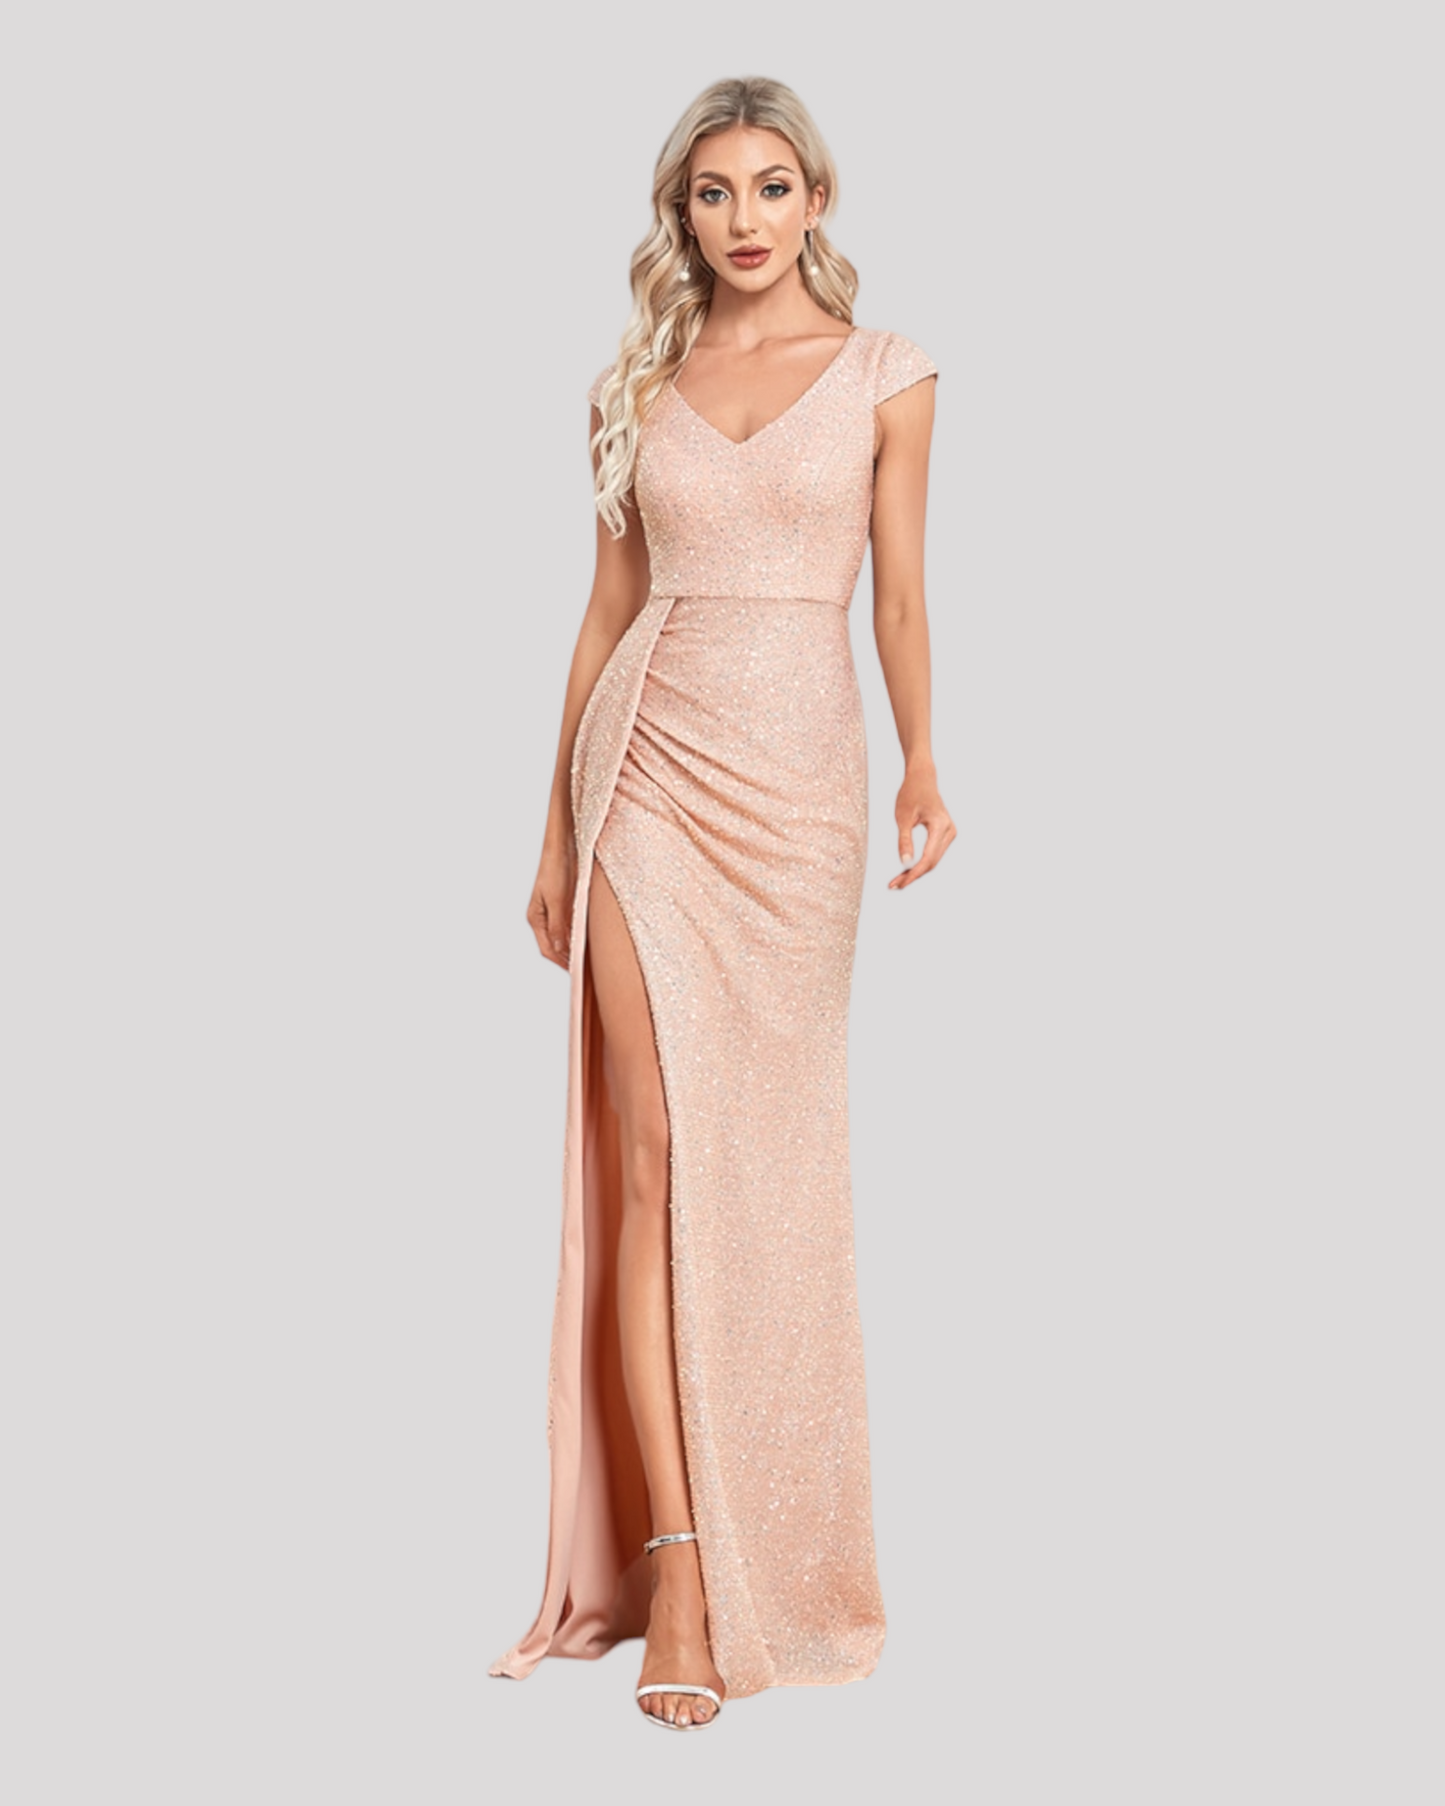 Champagne Pink Mermaid Sparkle Dress with V Neckline, Capped Sleeve and Beautiful pleating with Leg Split